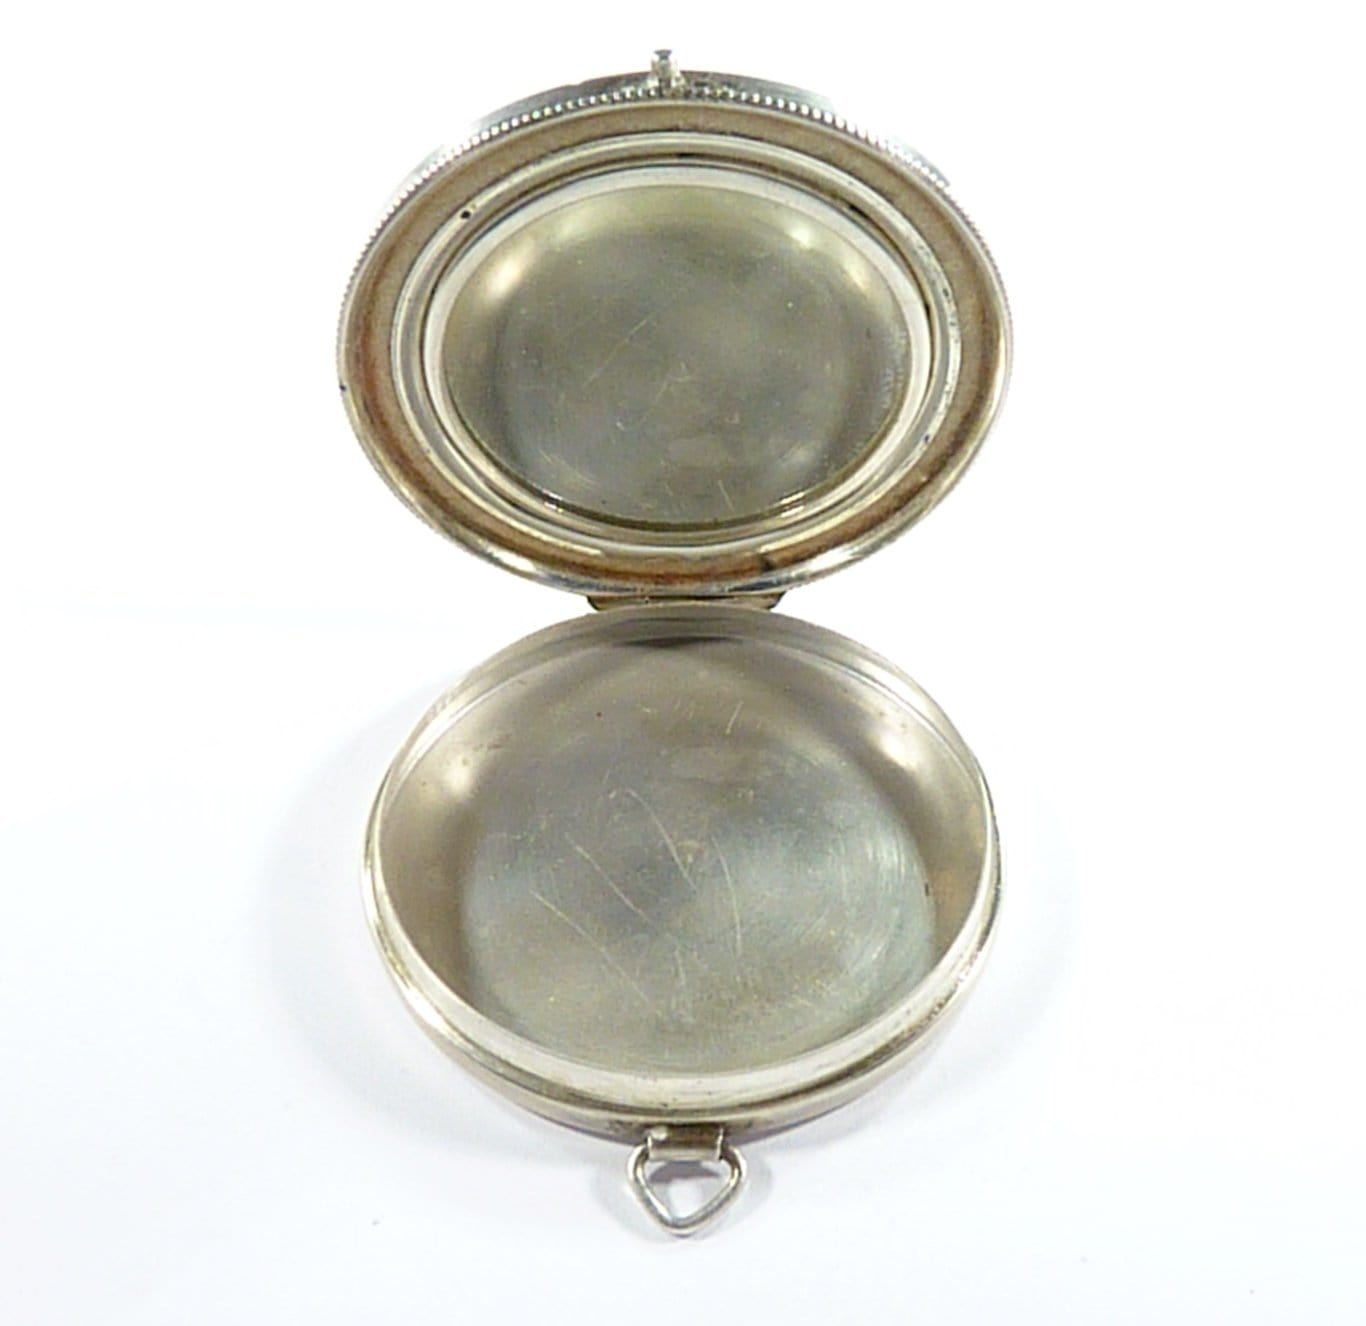 Grapes Purse Mirror | Lindsay Claire Pewter decor by Hampshire Pewter